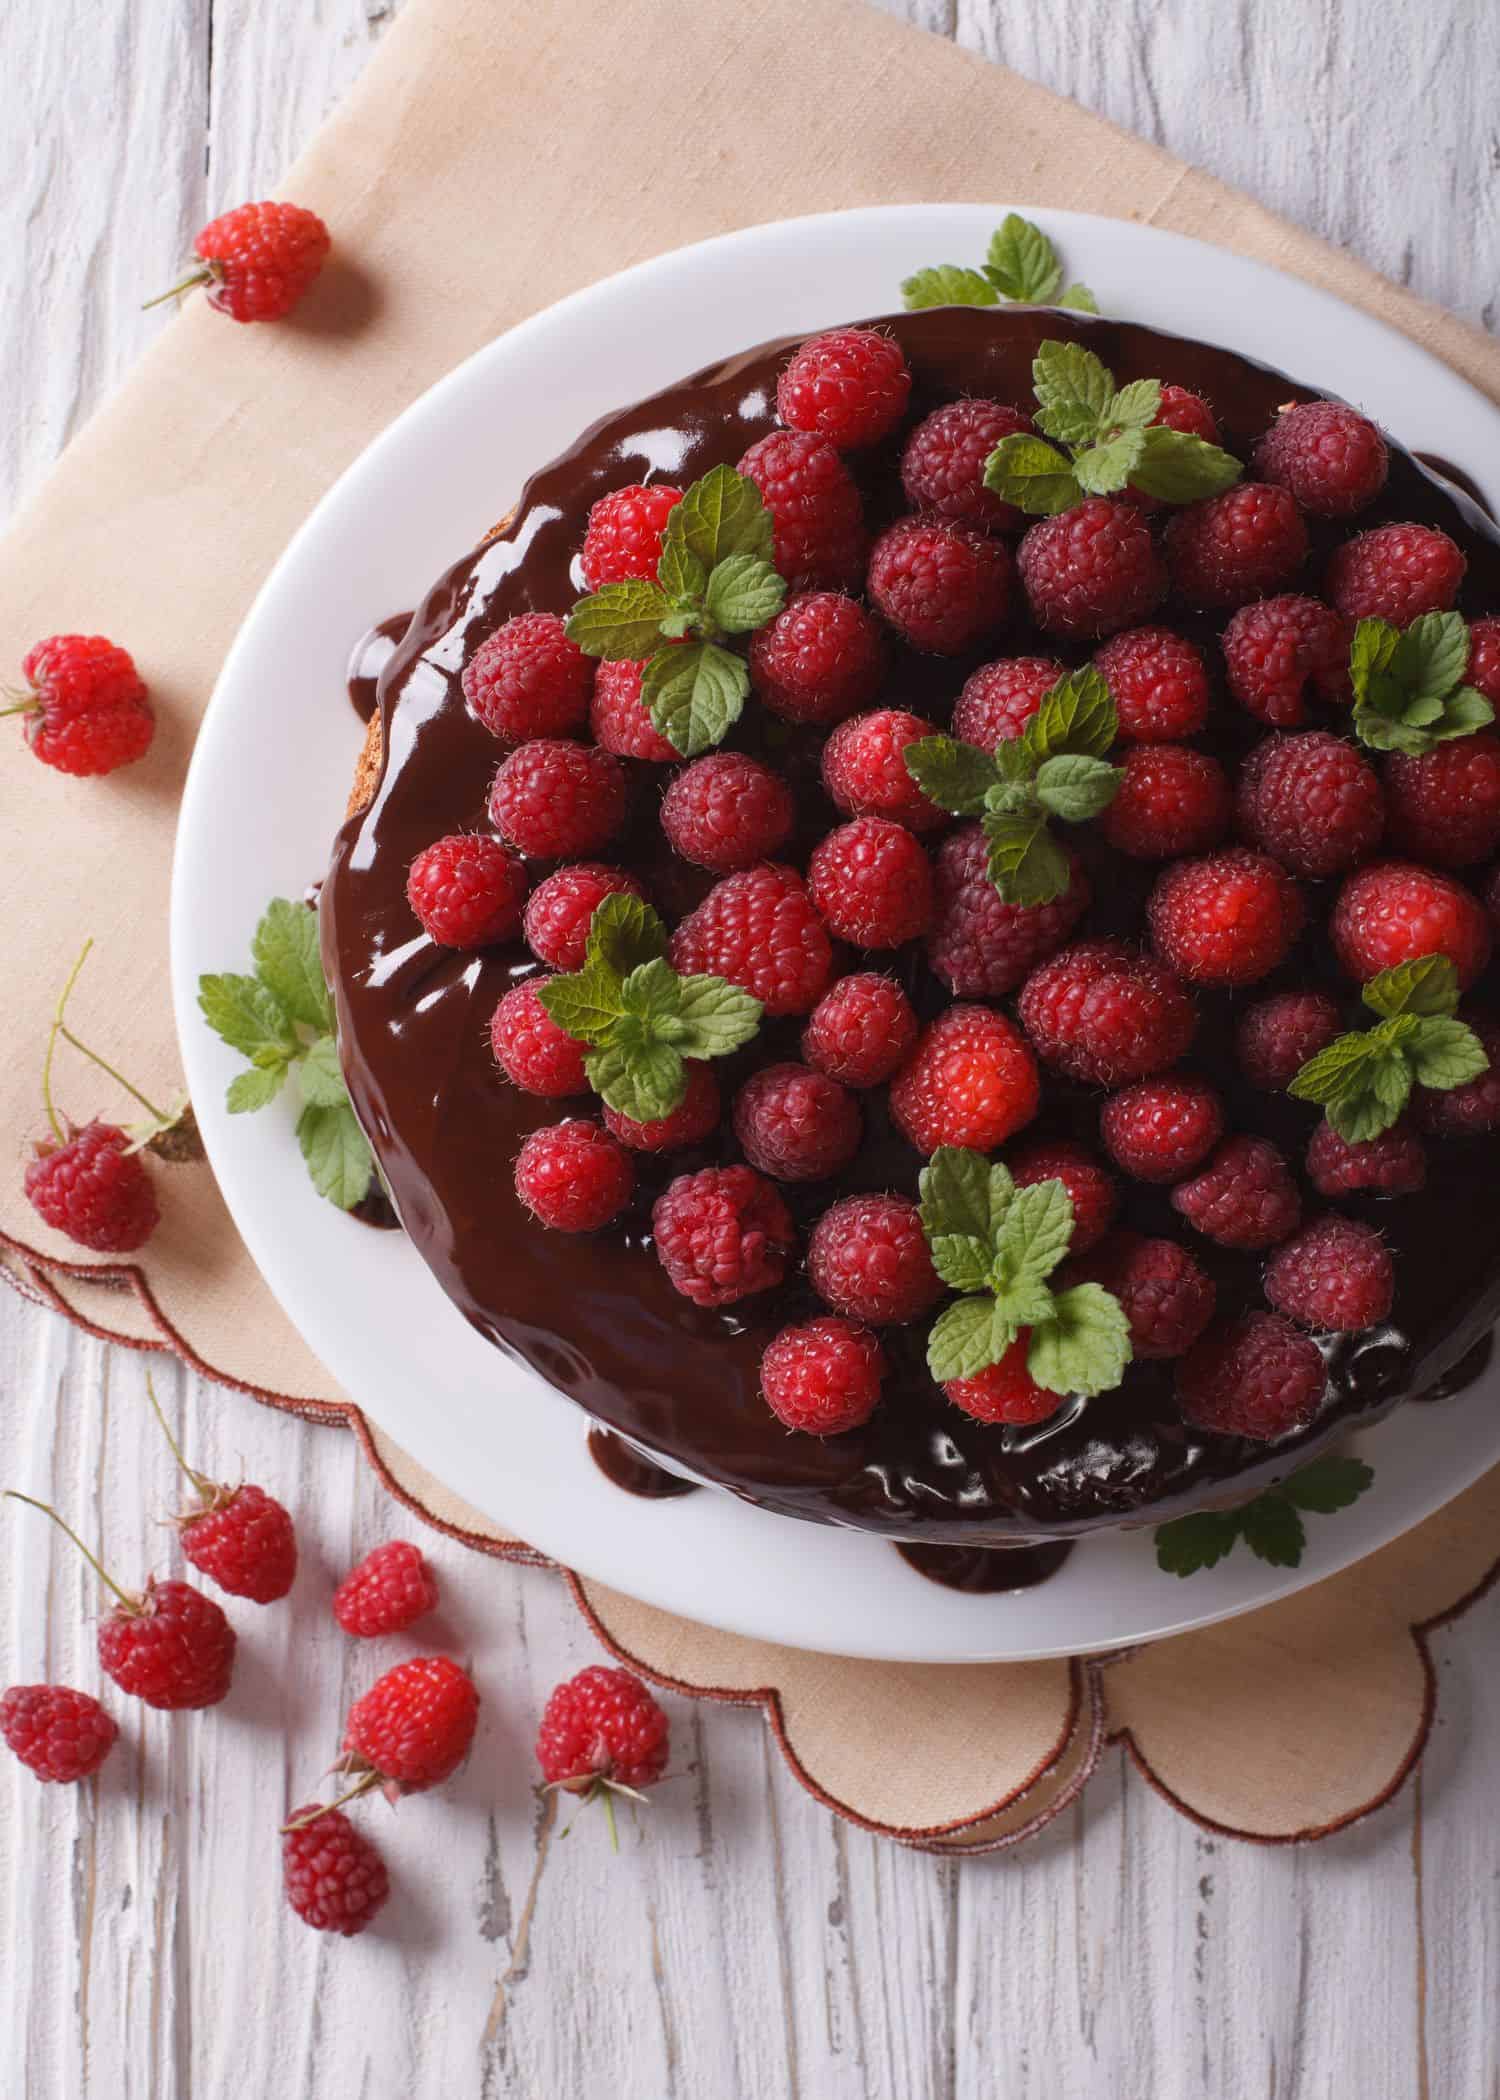 Easy to make Prized French dessert with chocolate and Rasberry.